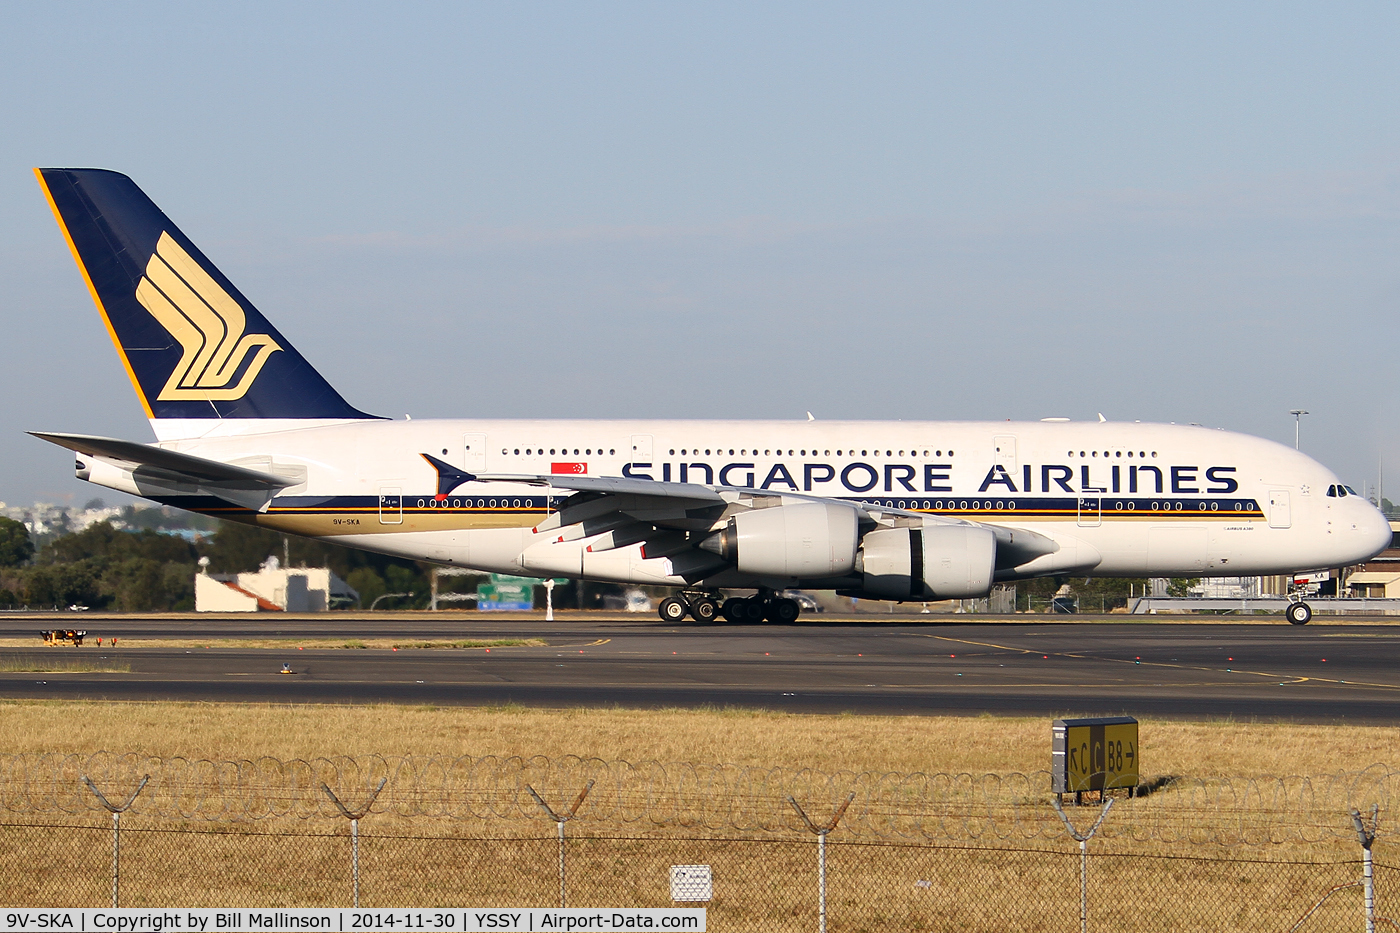 9V-SKA, 2007 Airbus A380-841 C/N 003, taxi from 34L